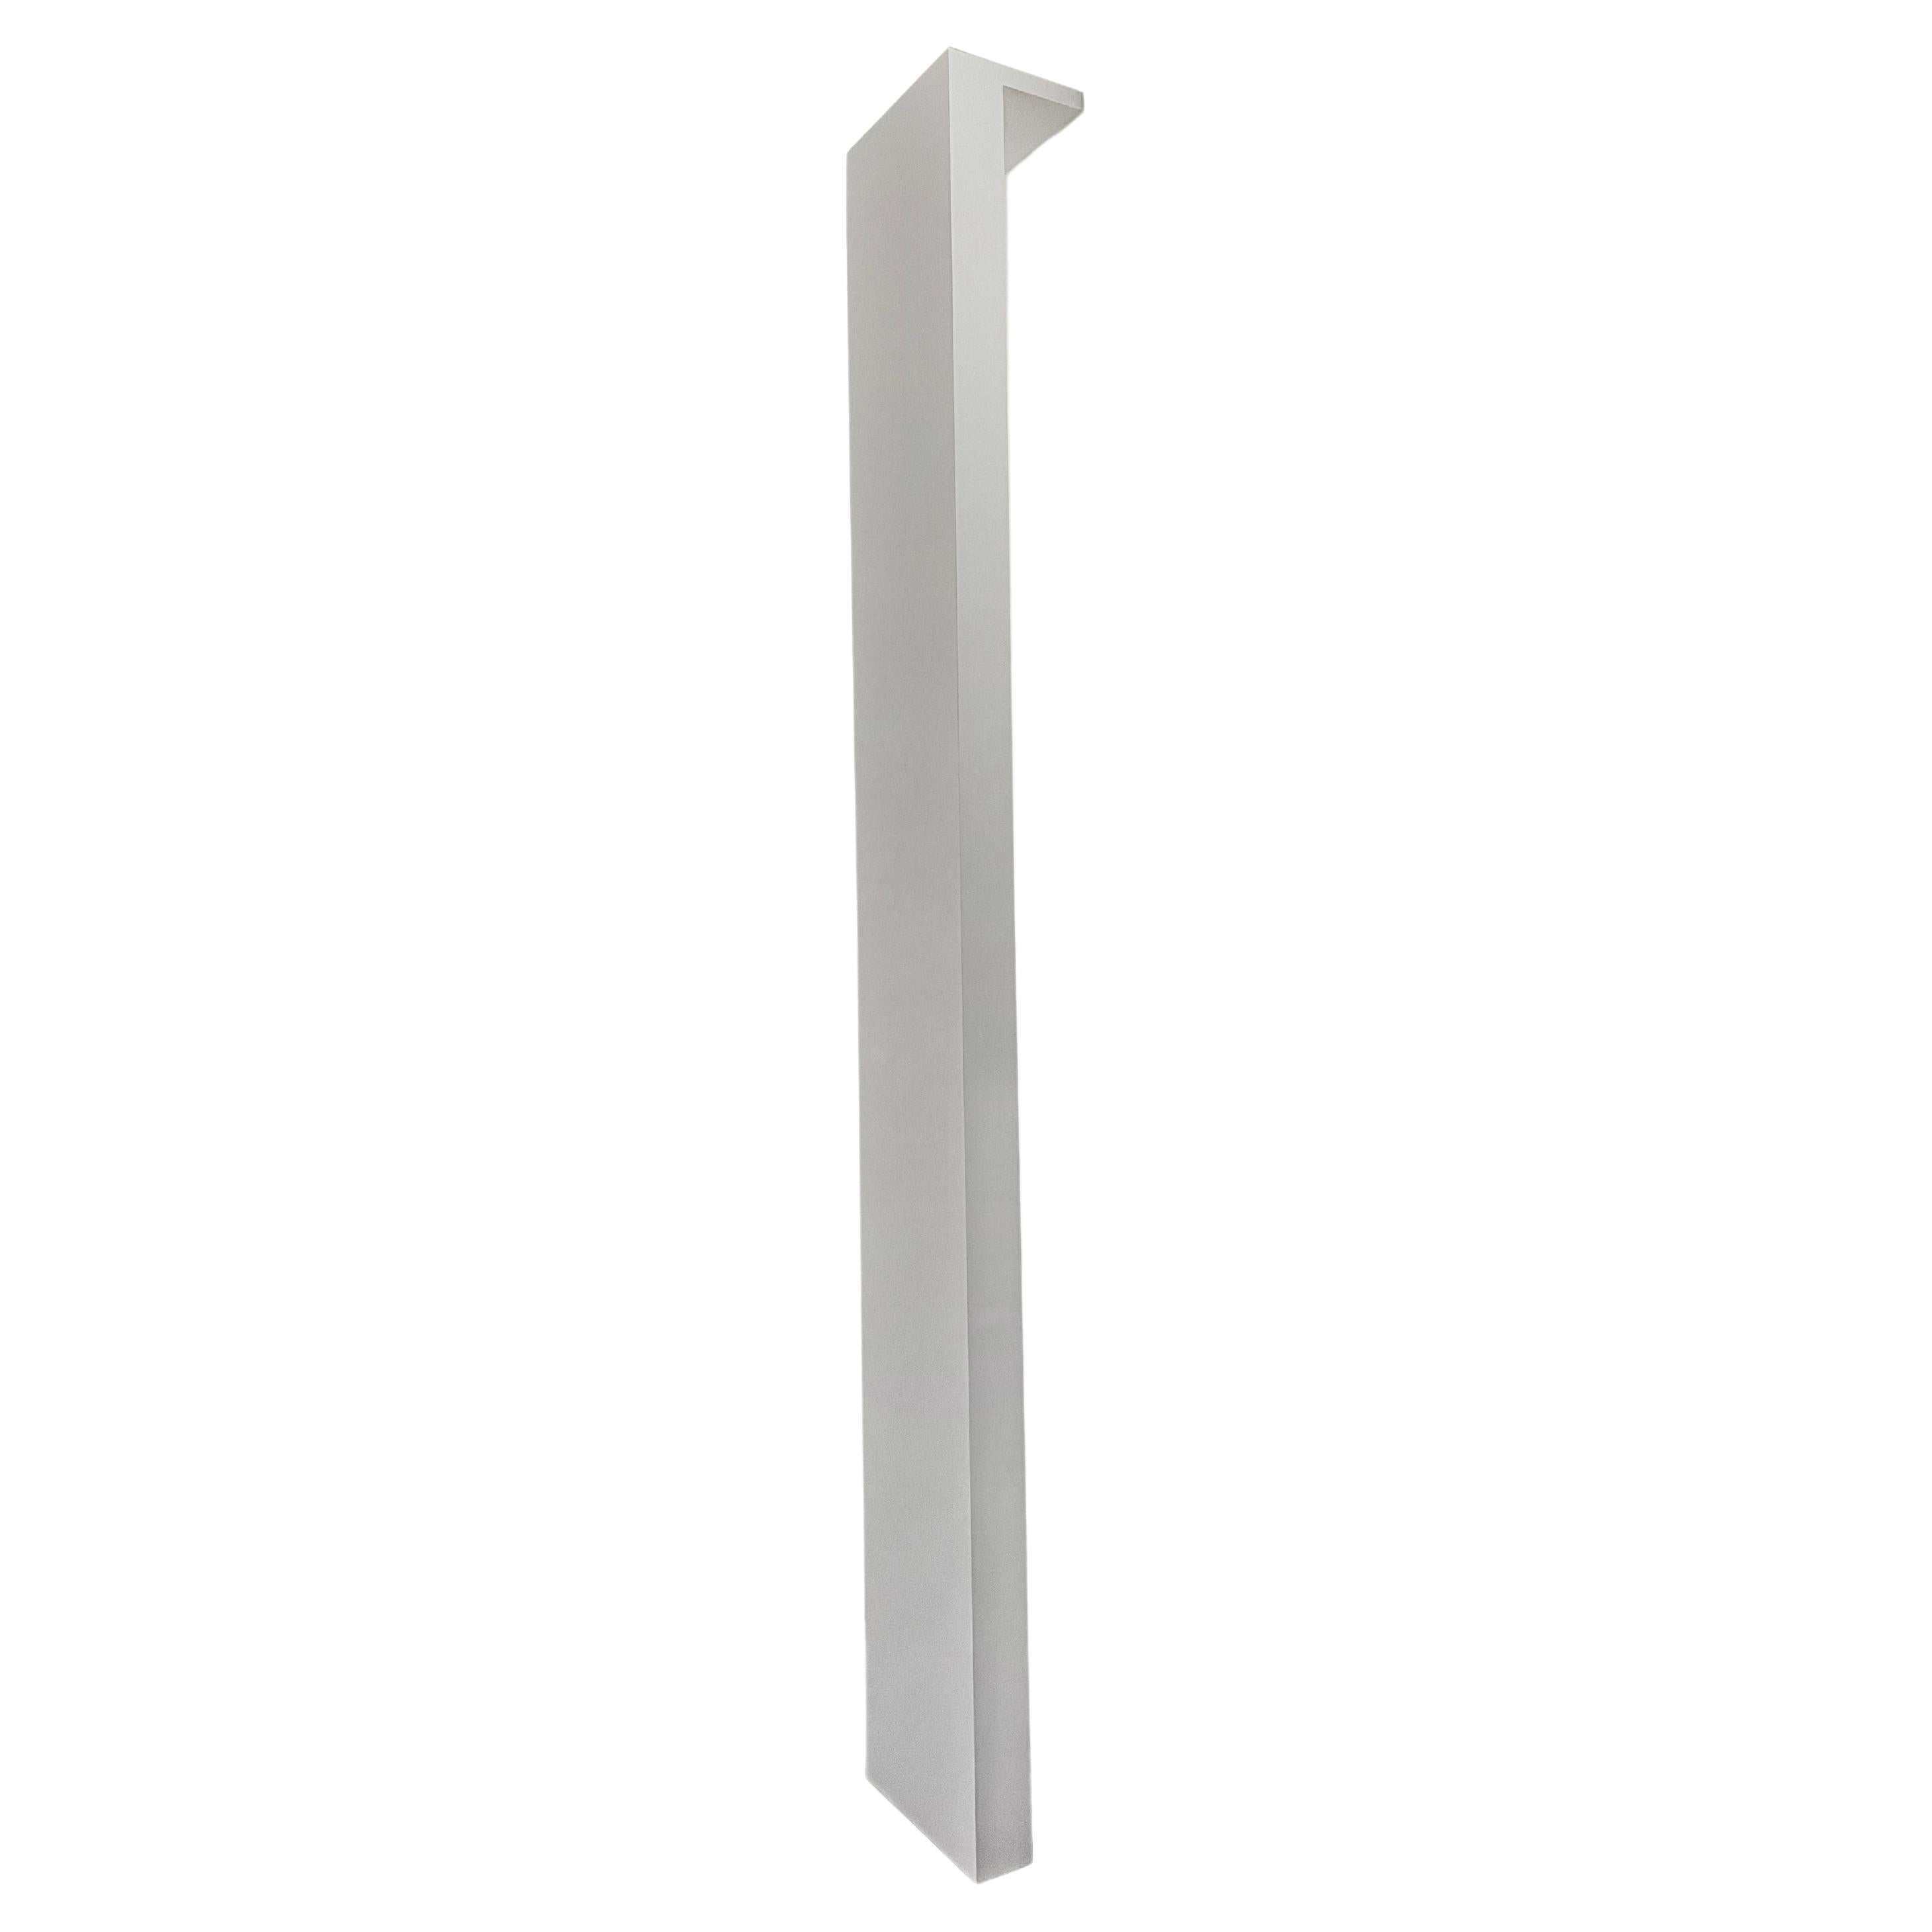 Labyrinth Light Extreme Minimalist Floor Vertical Led Wall Lamp For Sale